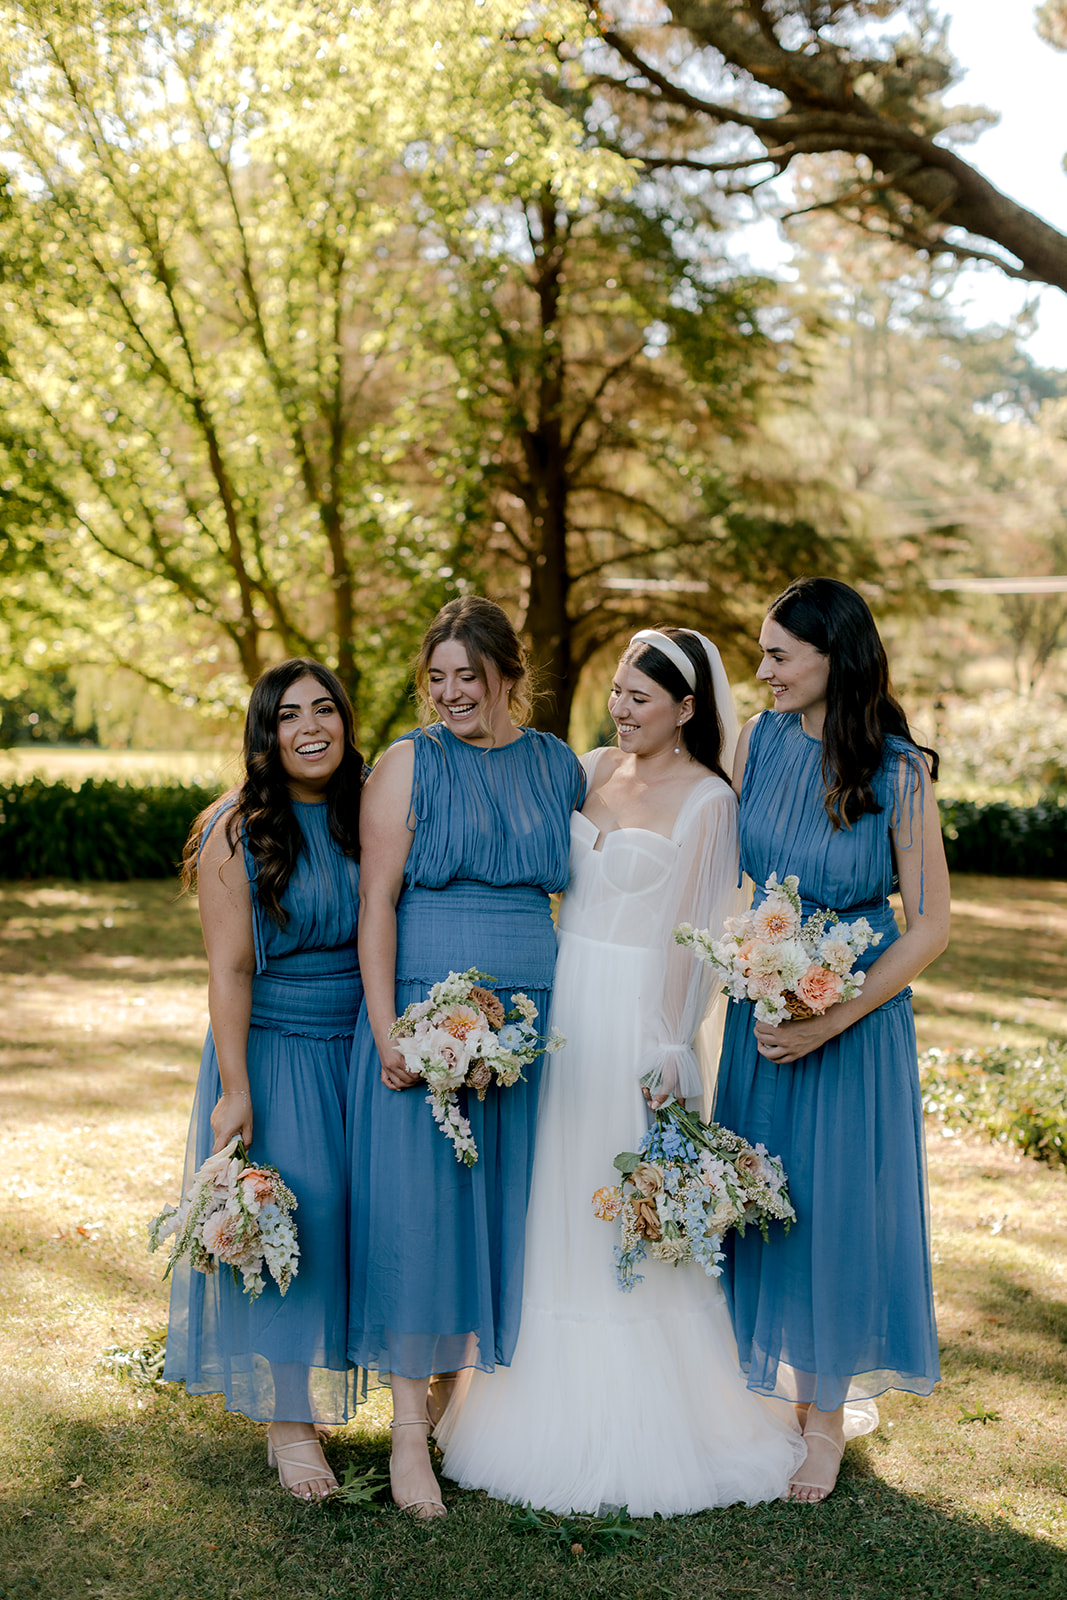 Bride with her bridesmaids holding their bridal bouquets at her elegant country wedding.